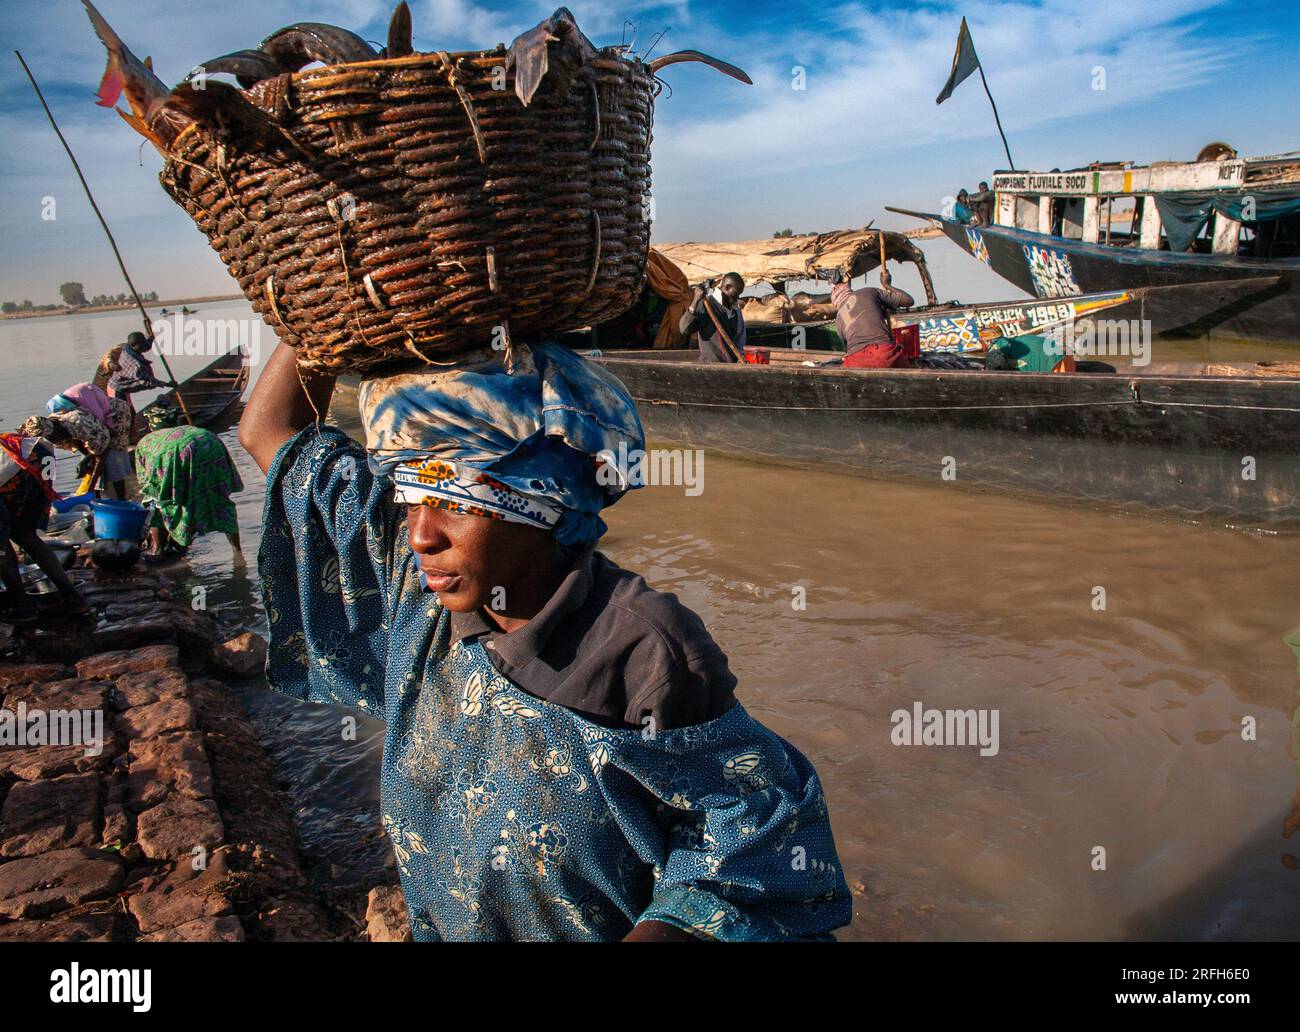 Fishermen and labourers unloading fish in the port of Mopti. Mali, West Africa Stock Photo